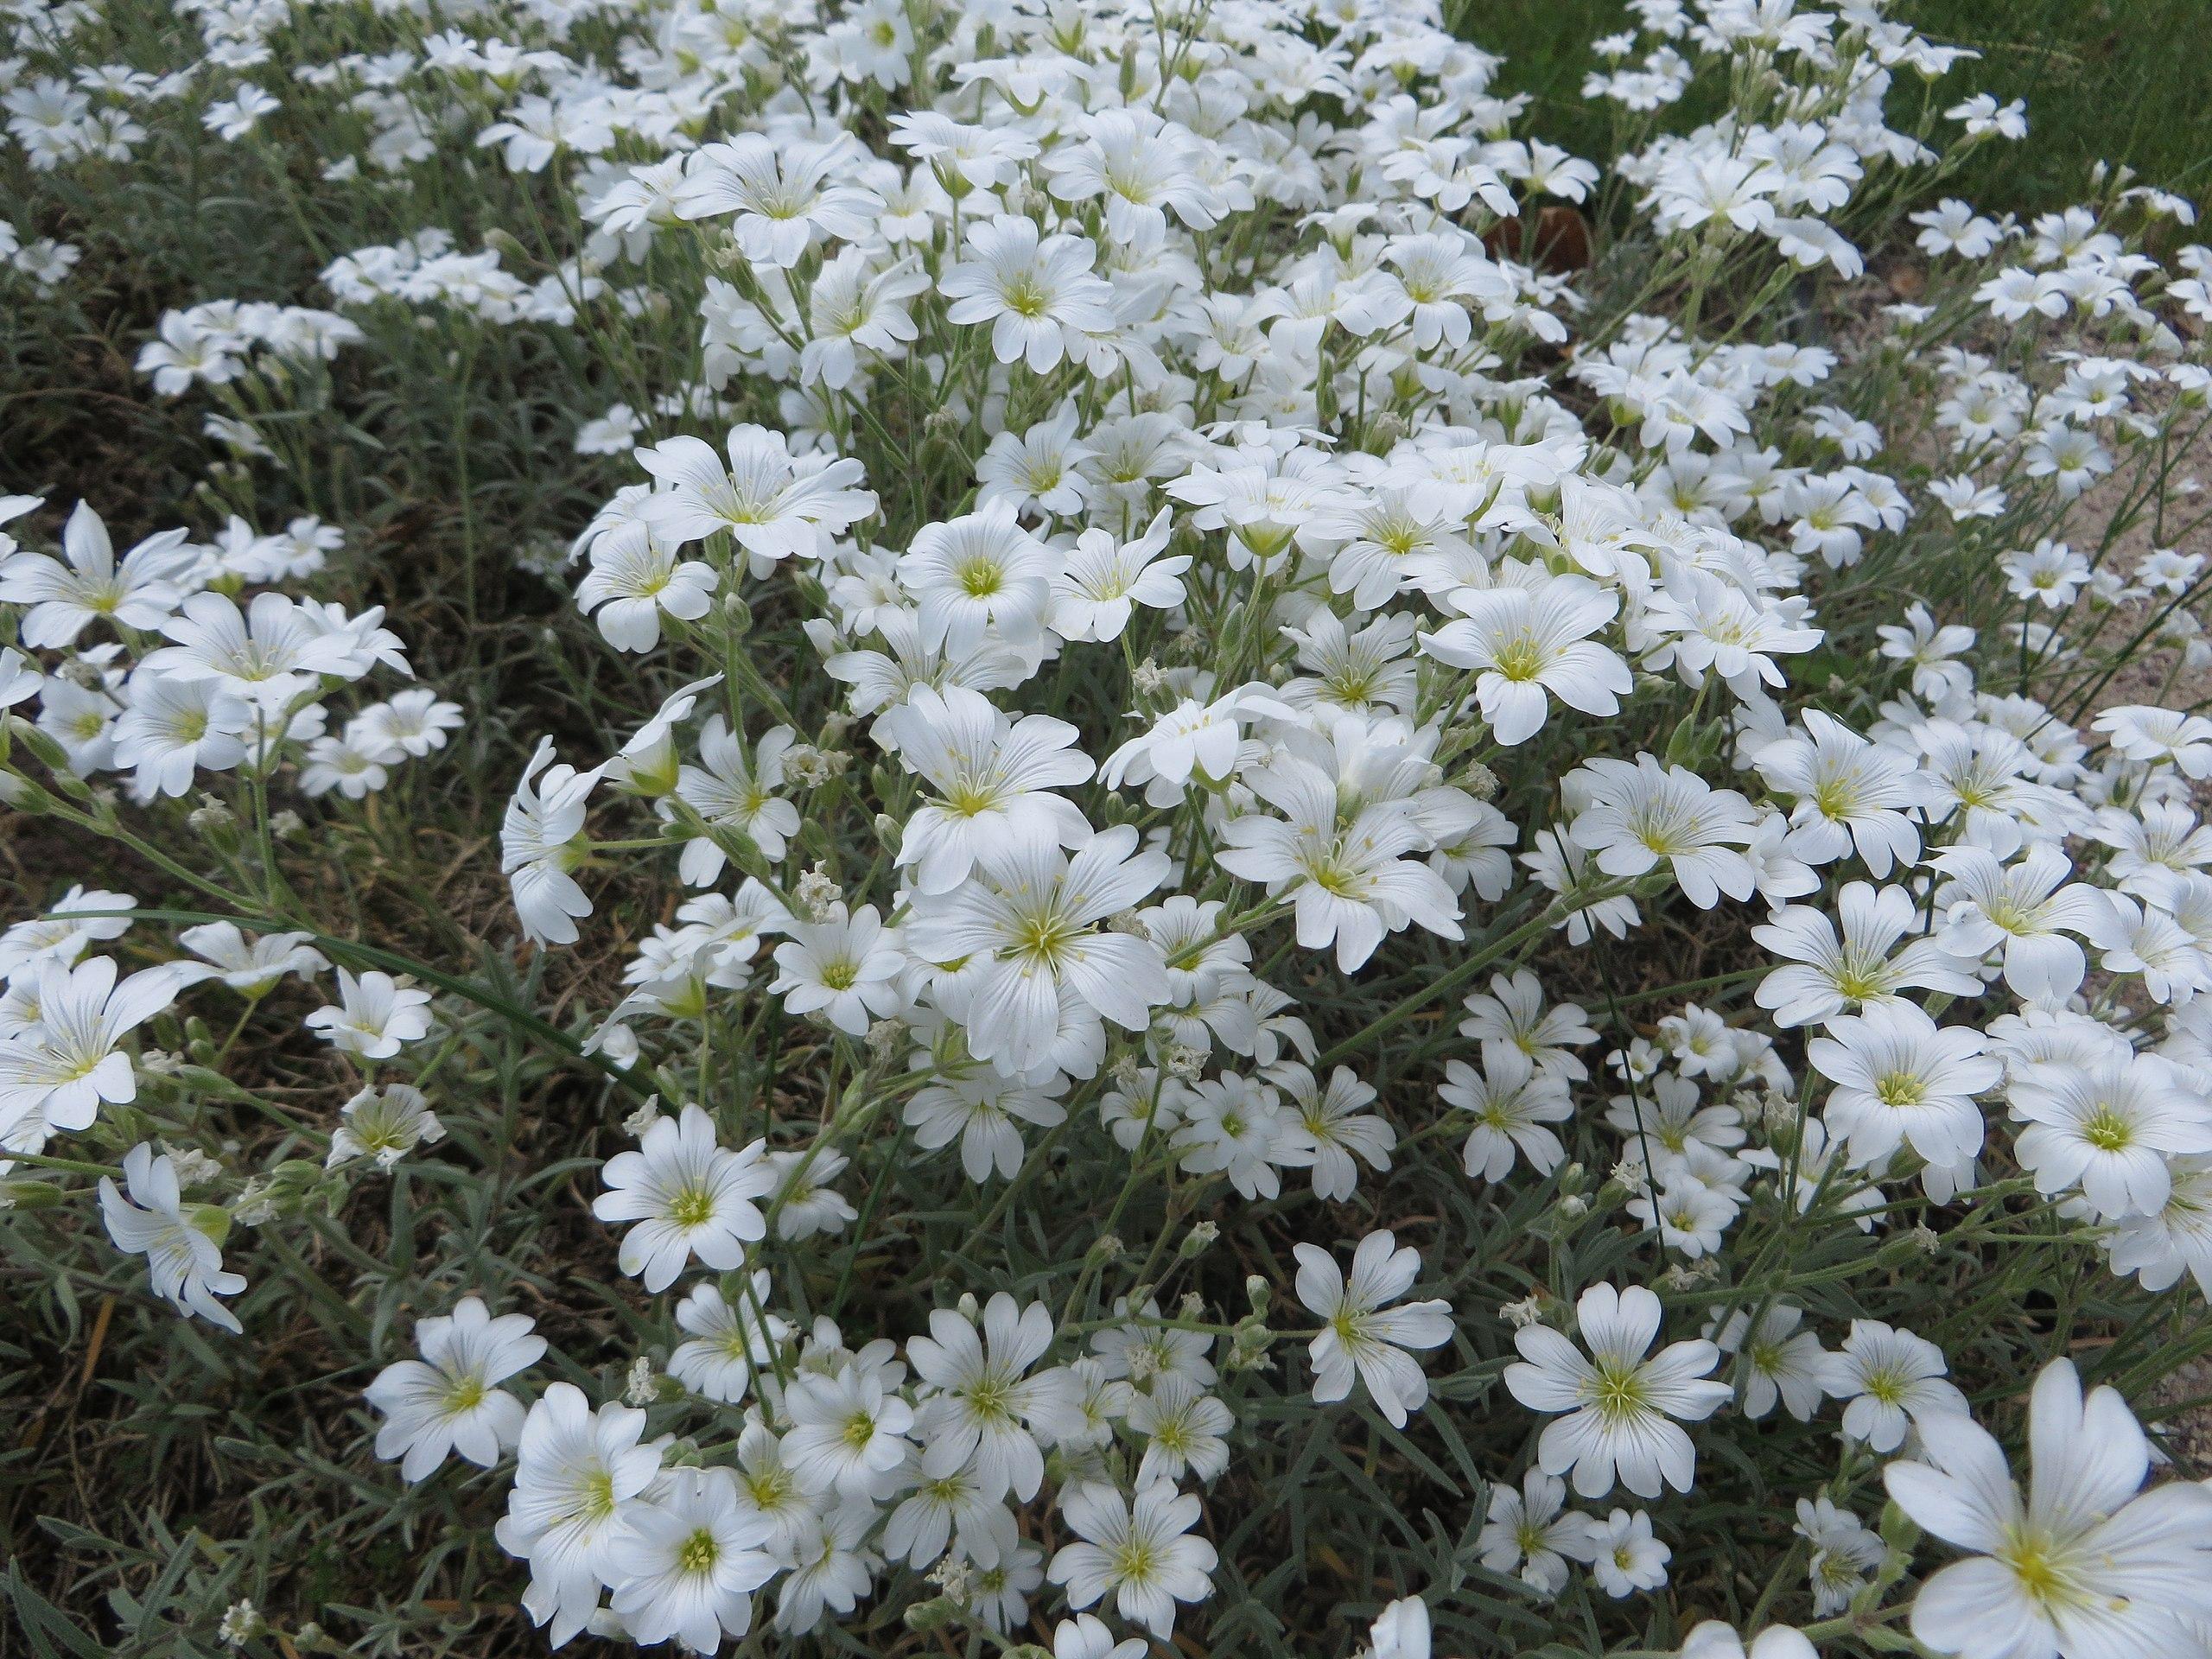 white flowers with yellow center, white filaments, yellow anthers, light-green leaves and stems